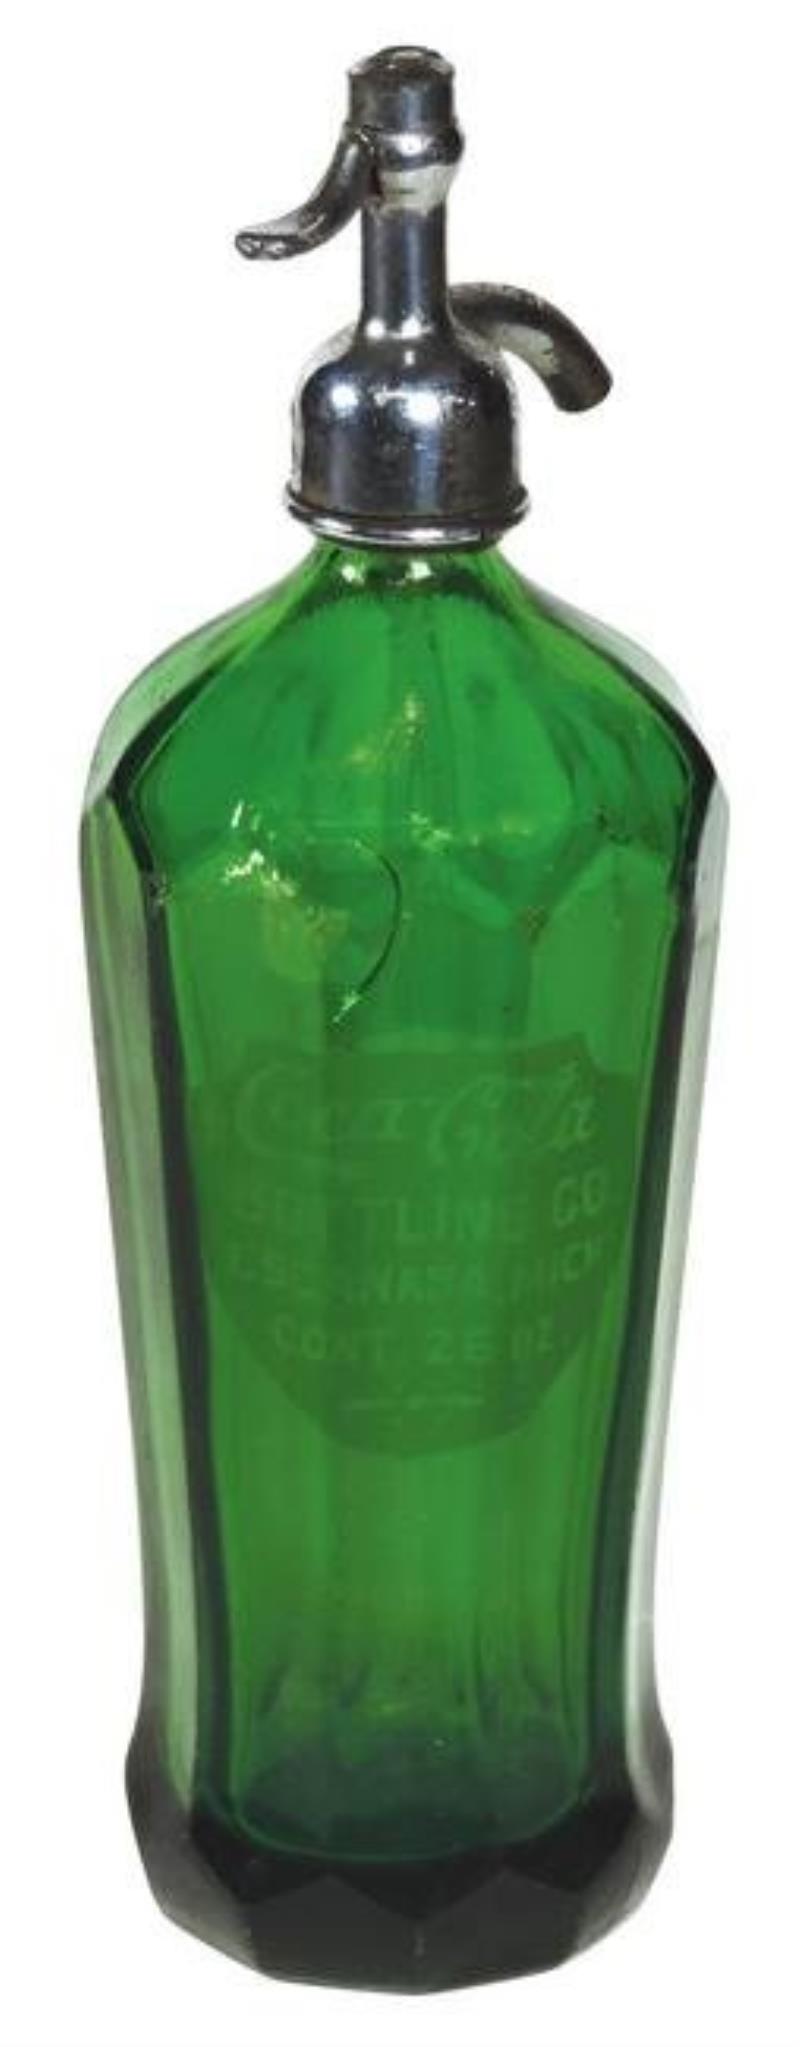 Coca-Cola Seltzer bottle, etched emerald green glass,